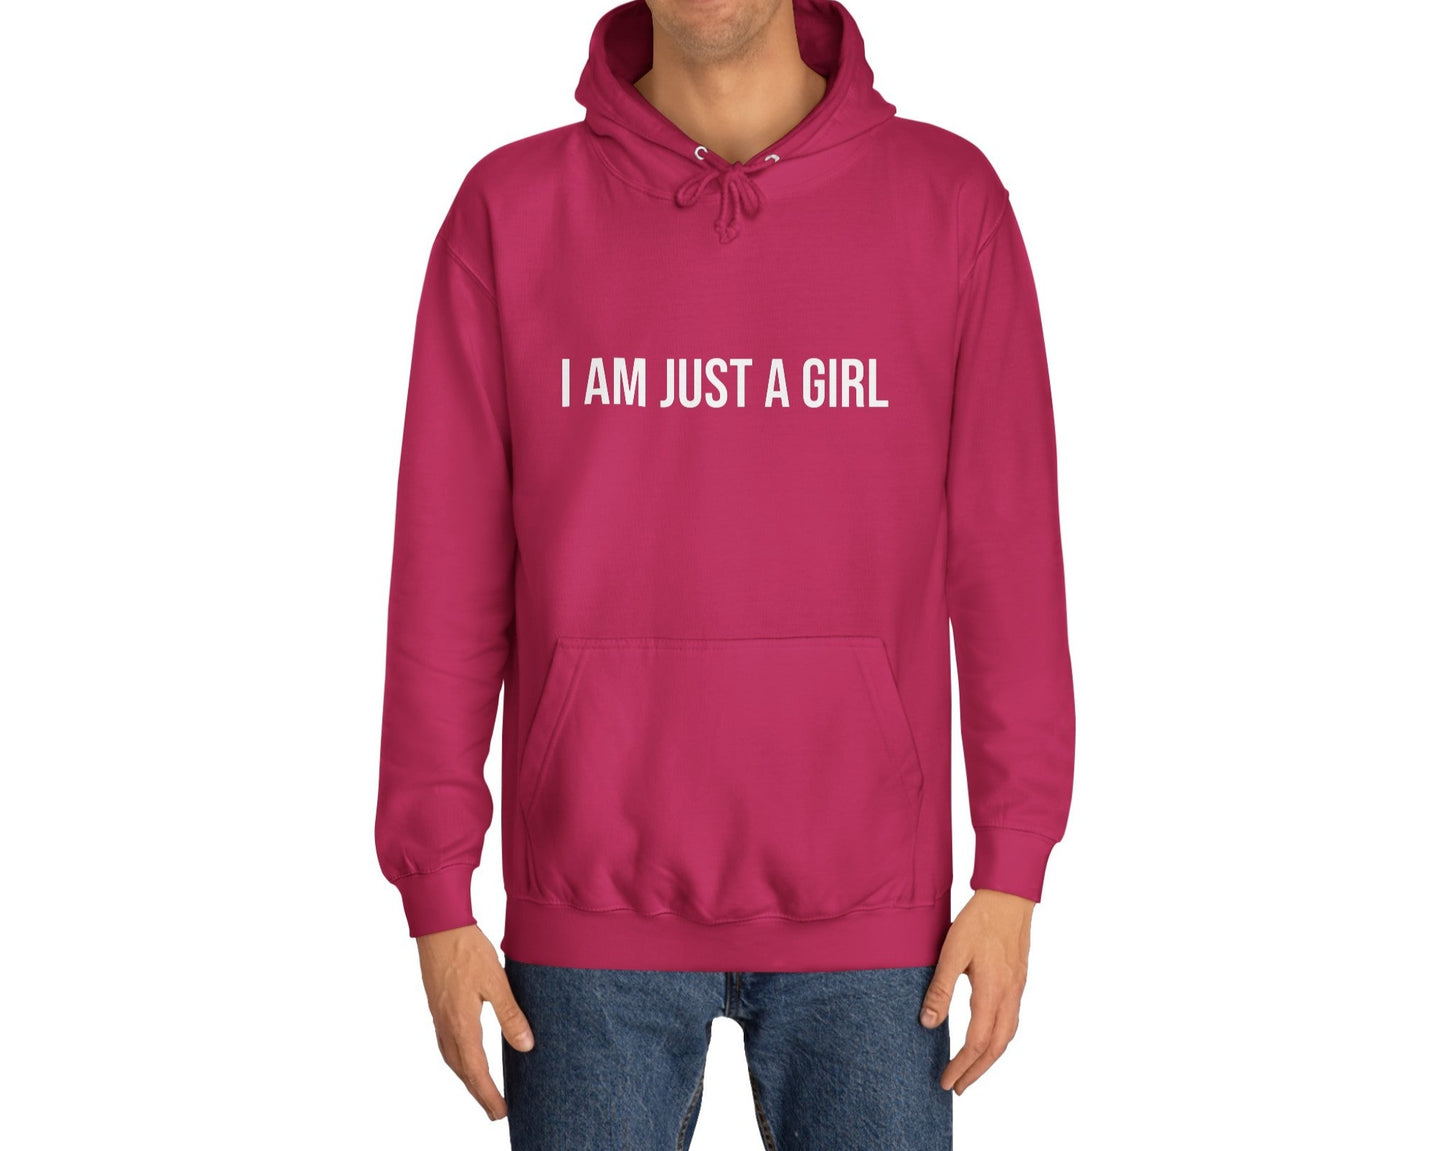 I AM JUST A GIRL